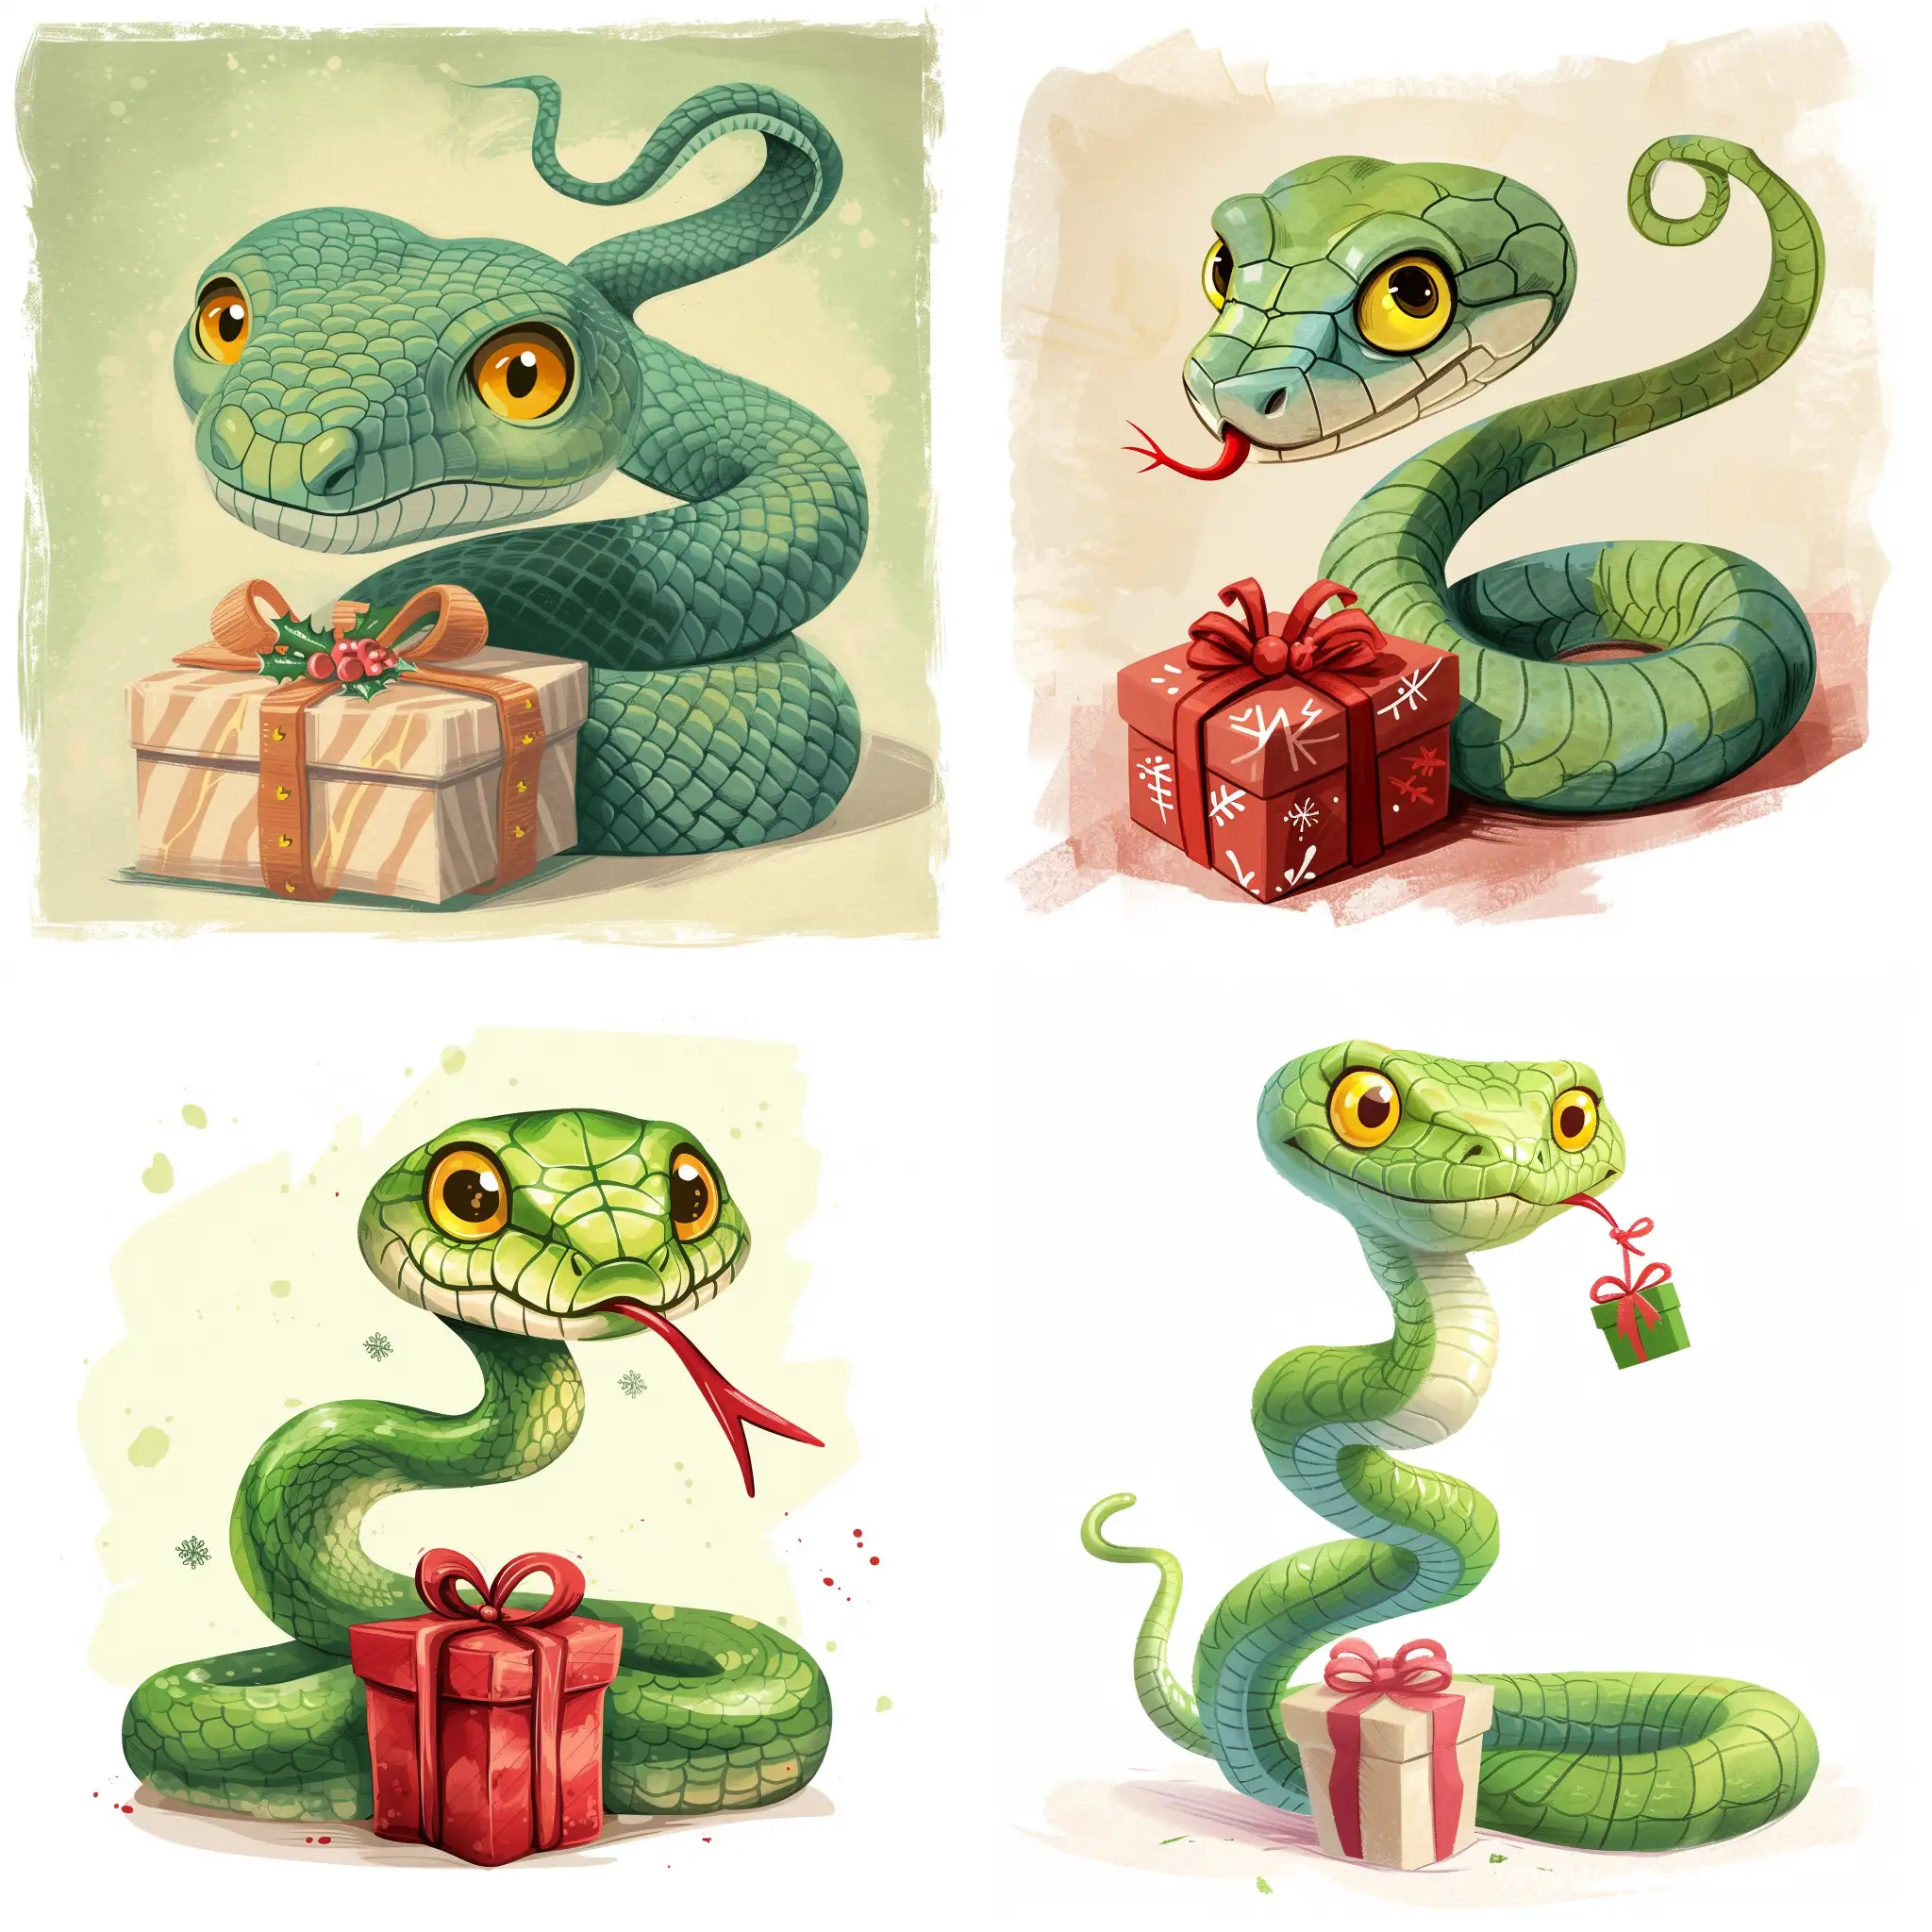 Adorable-Cartoon-Snake-with-Christmas-Gift-Tail-Illustration